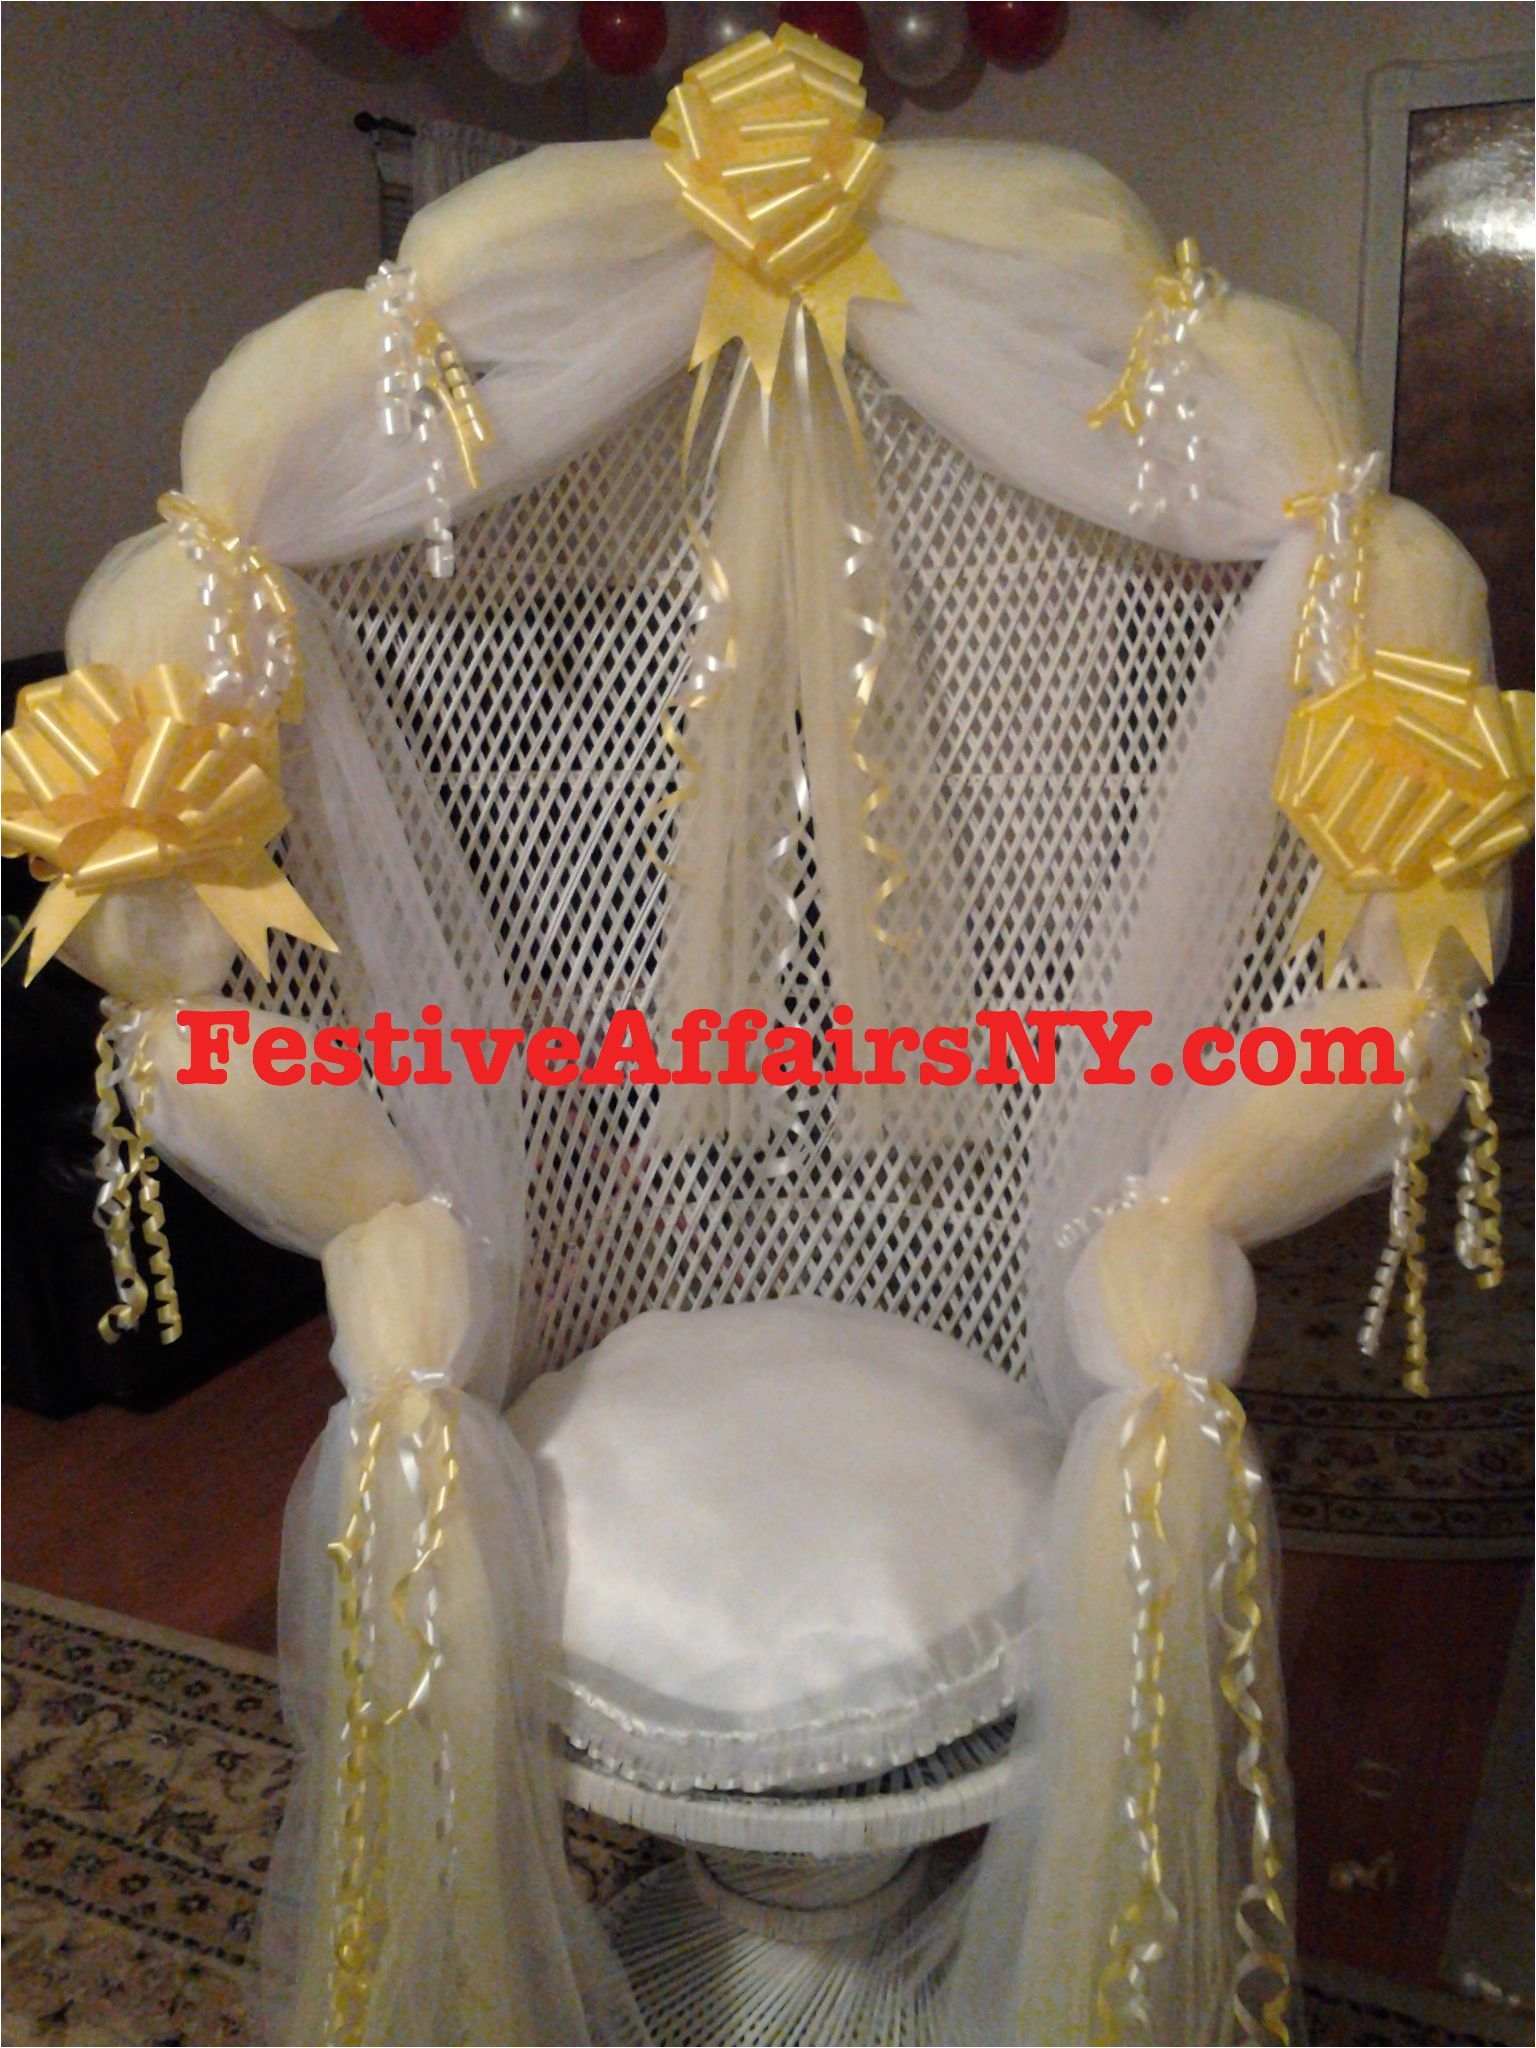 Baby Shower Chairs for Rent In Brooklyn Baby Shower Chair Yellow Festive Affairs Ny Baby Shower